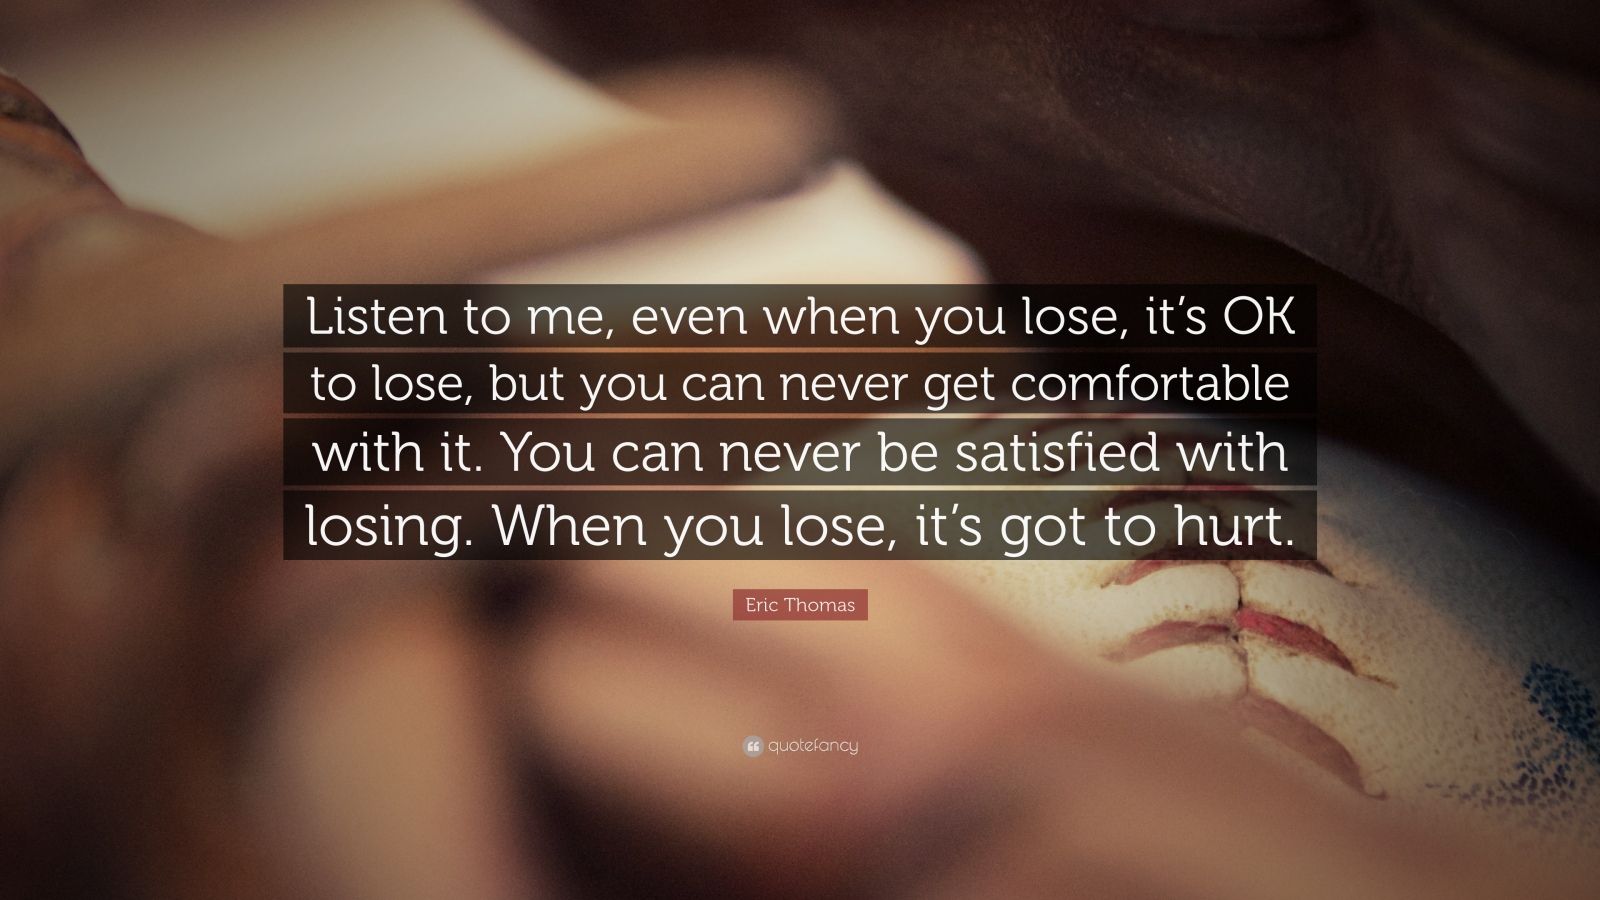 Eric Thomas Quote “Listen to me even when you lose it s OK